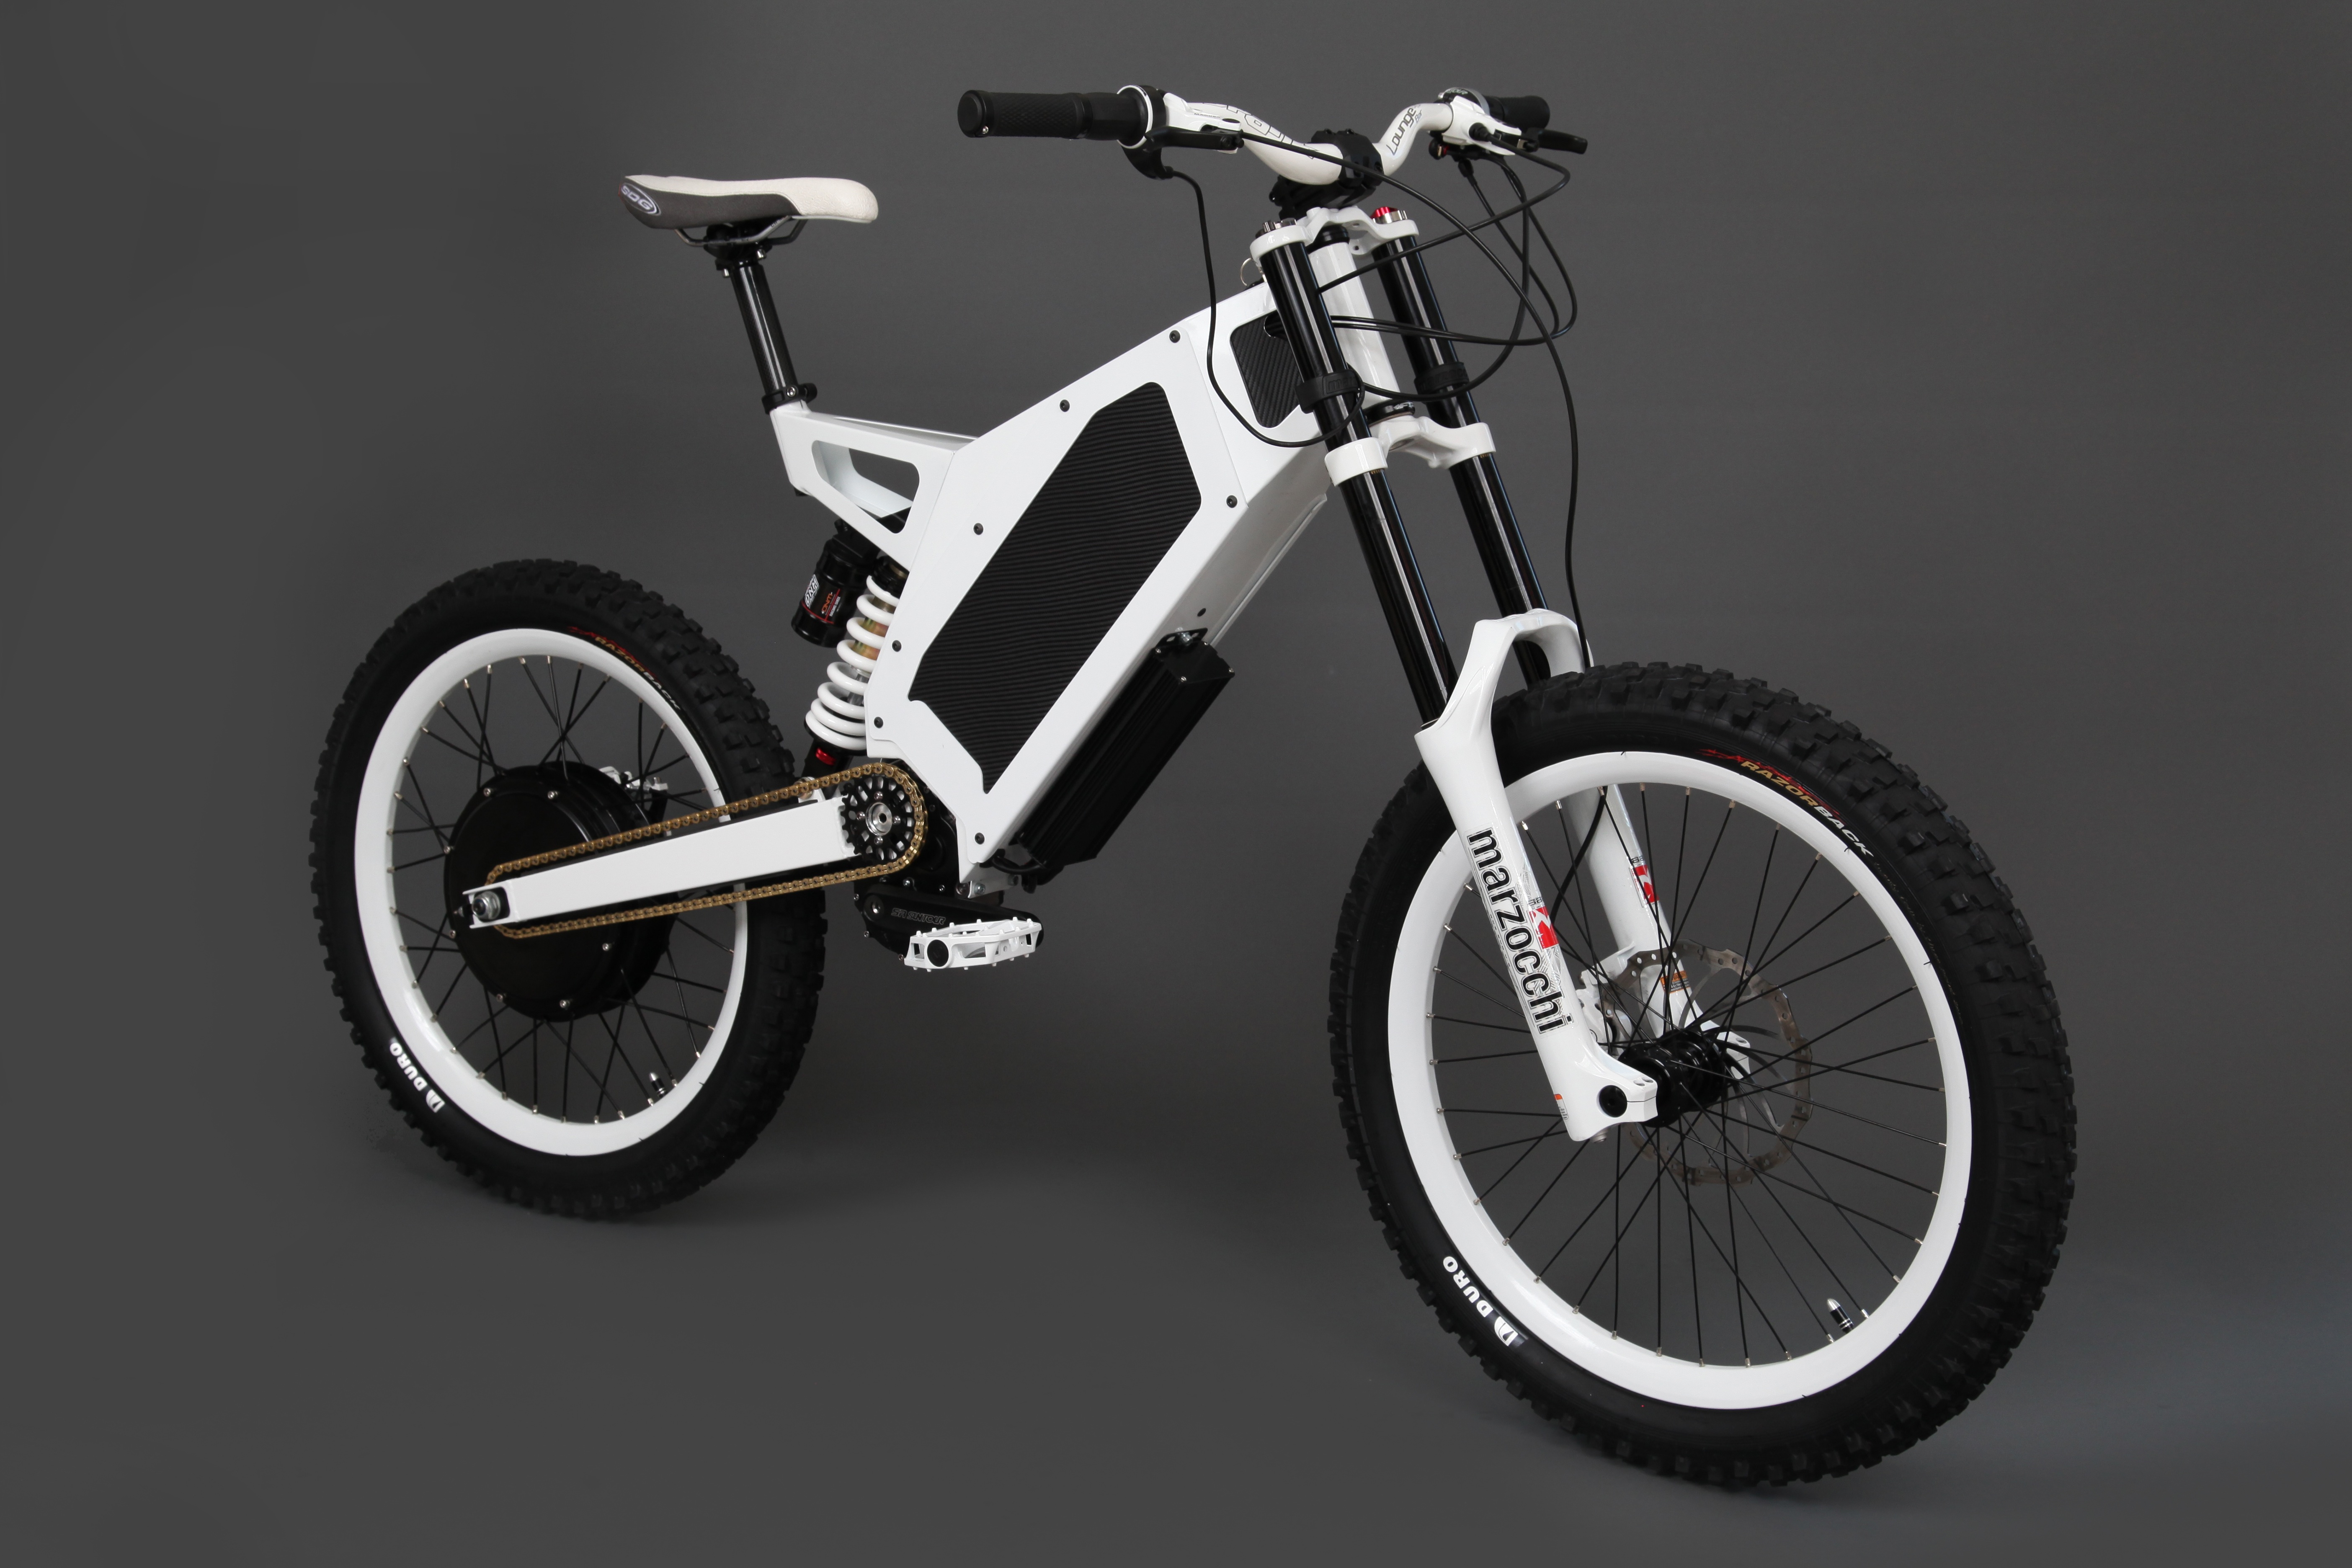 Stealth Electric Bikes Introduces New Upgrades and Customization